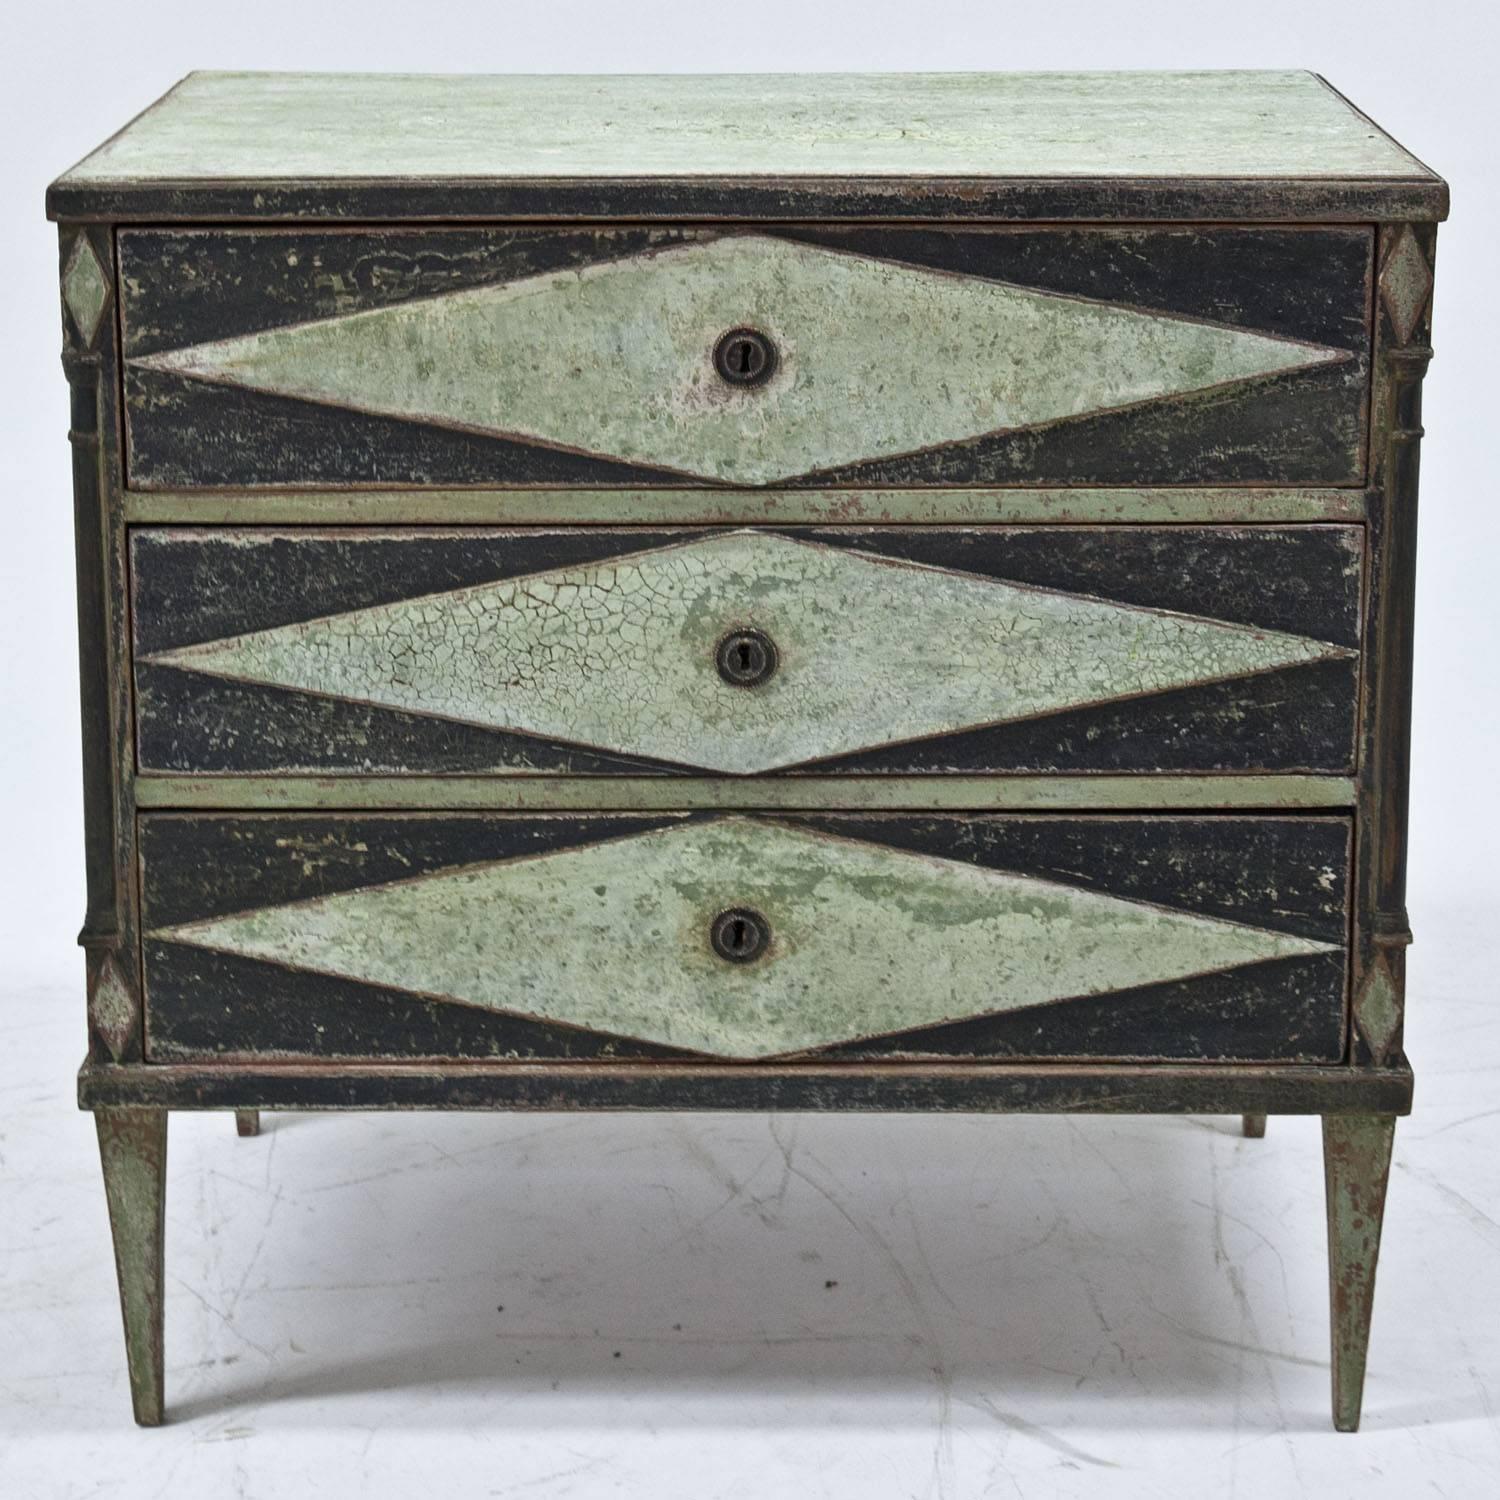 Chest of drawers on tapered legs with three drawers and a mint-green and black paint. The paint was redone and has a worn look to it.